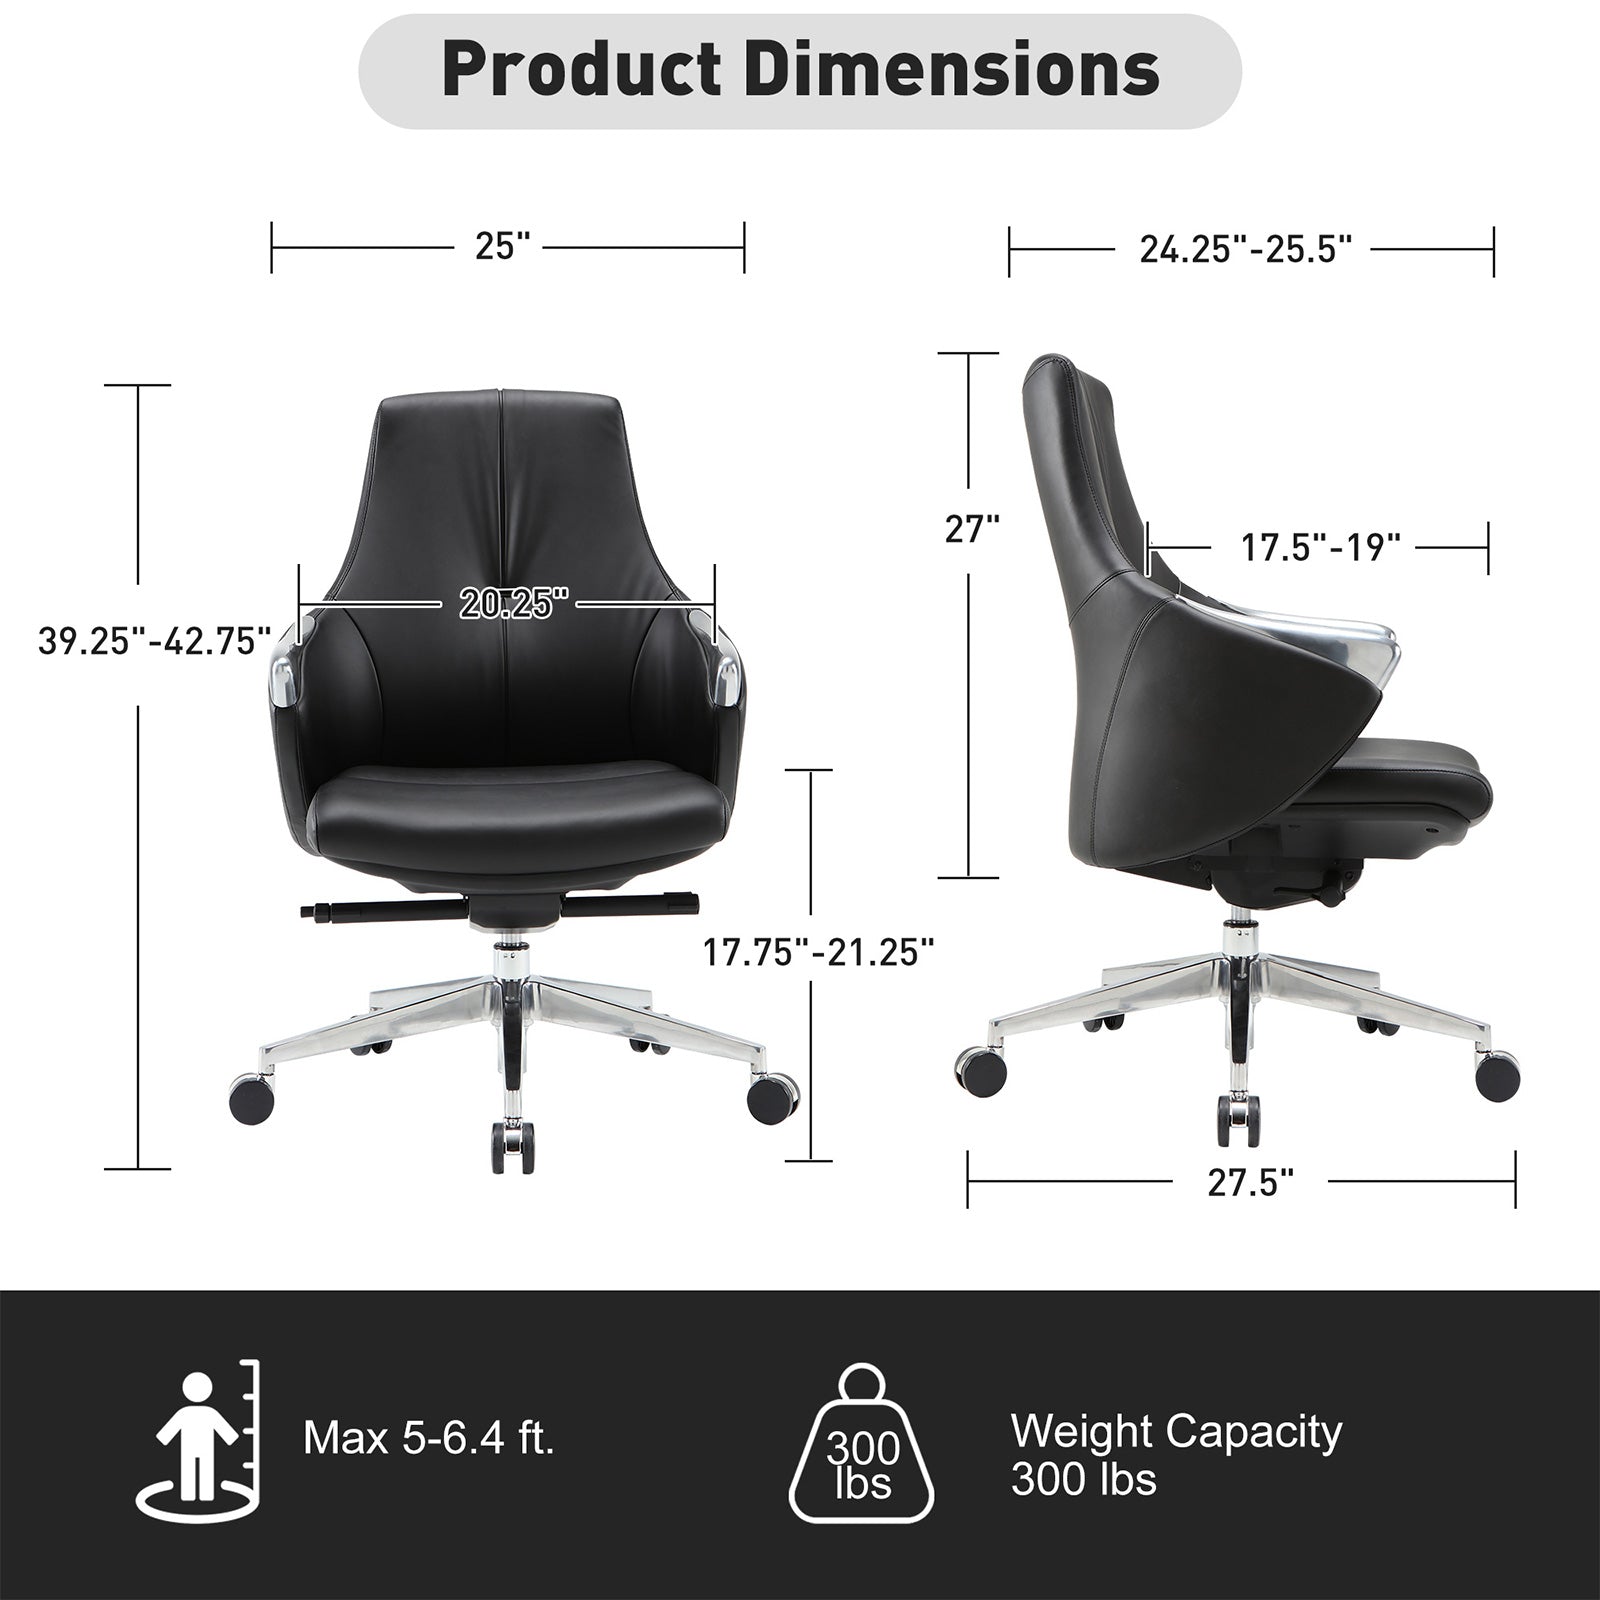 Executive Ergonomic Leather Office Chairs with Tilt and Height Adjustable, Black